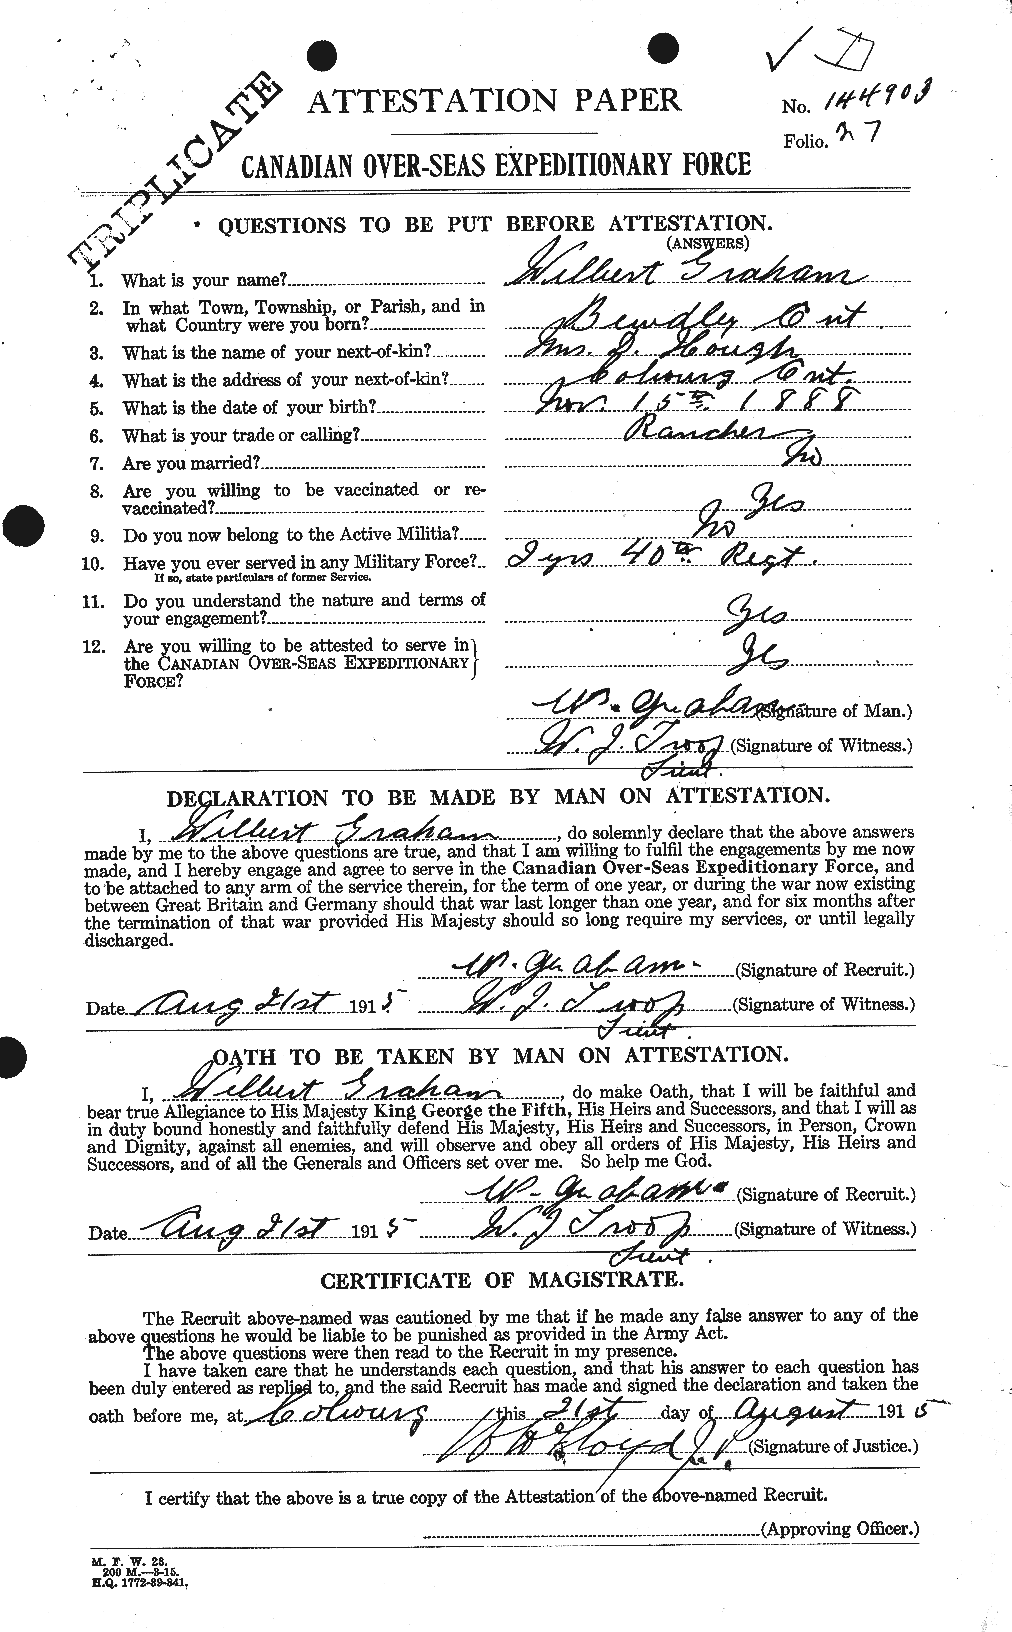 Personnel Records of the First World War - CEF 362668a